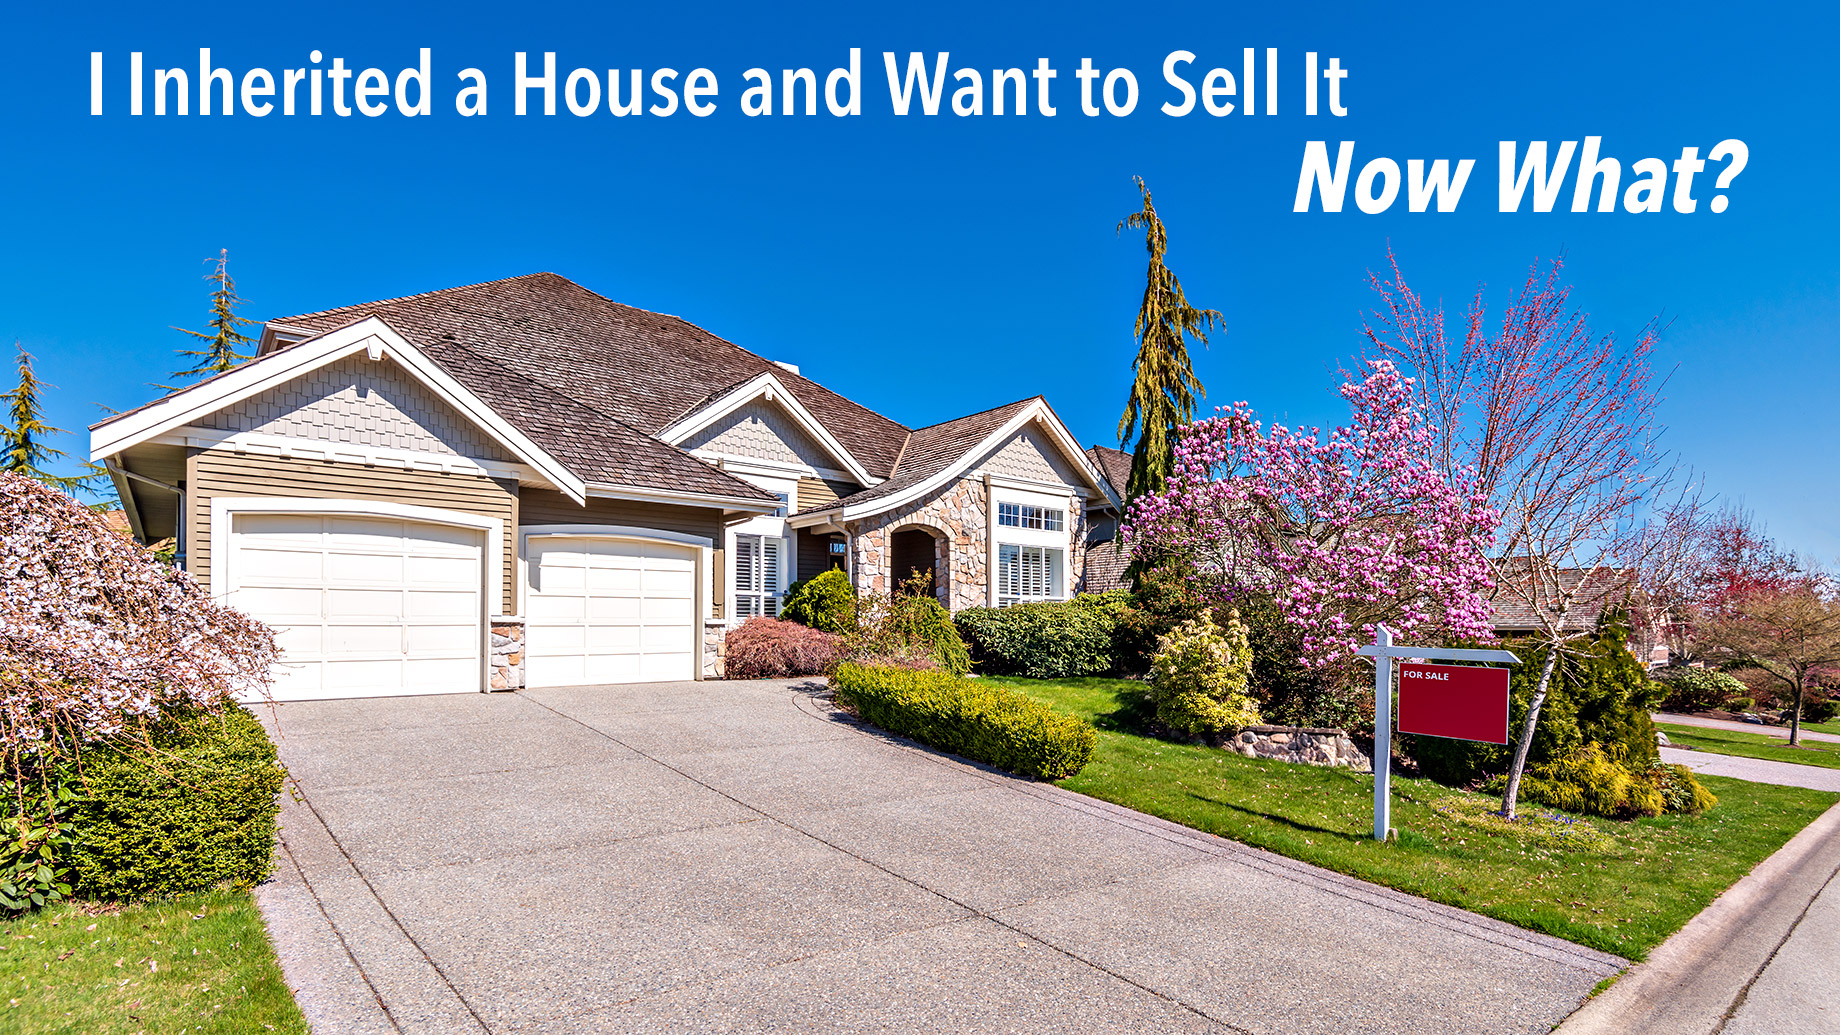 Relocating Sell Your Inherited House Quickly And Easily